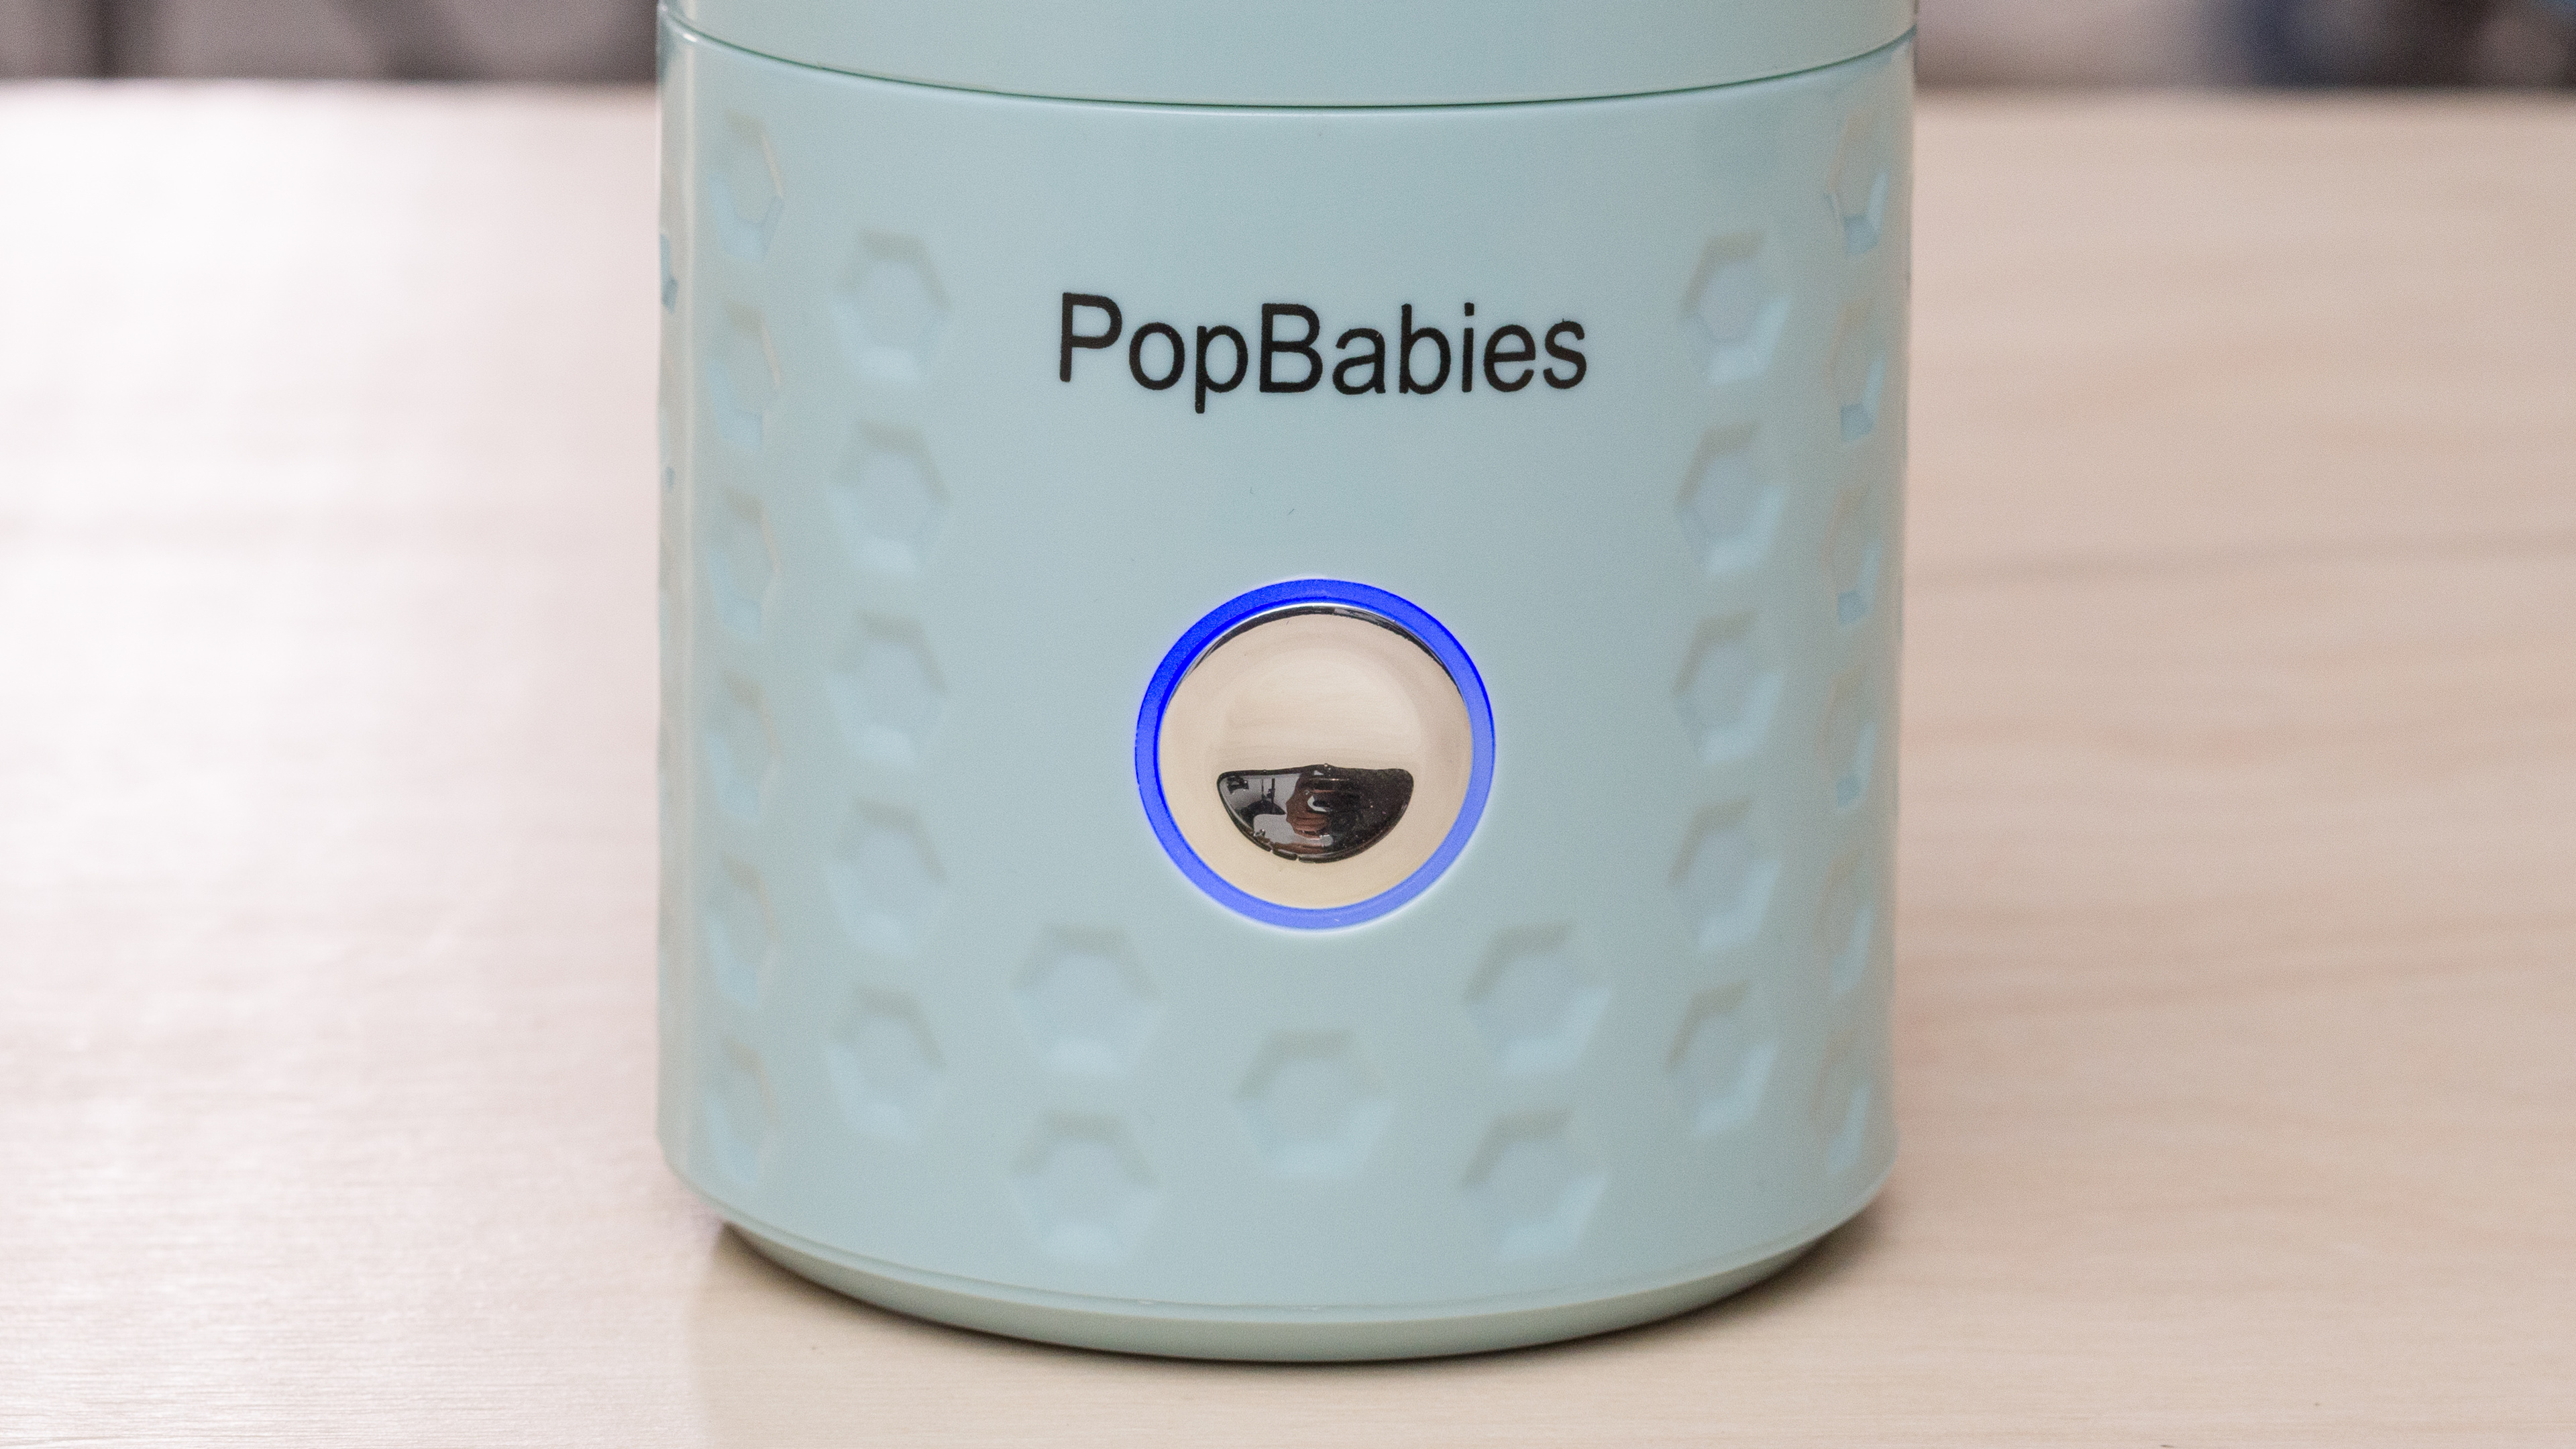 Portable blenders typically have simple controls, with just one button that runs short blending cycle (PopBabies Portable Blender)